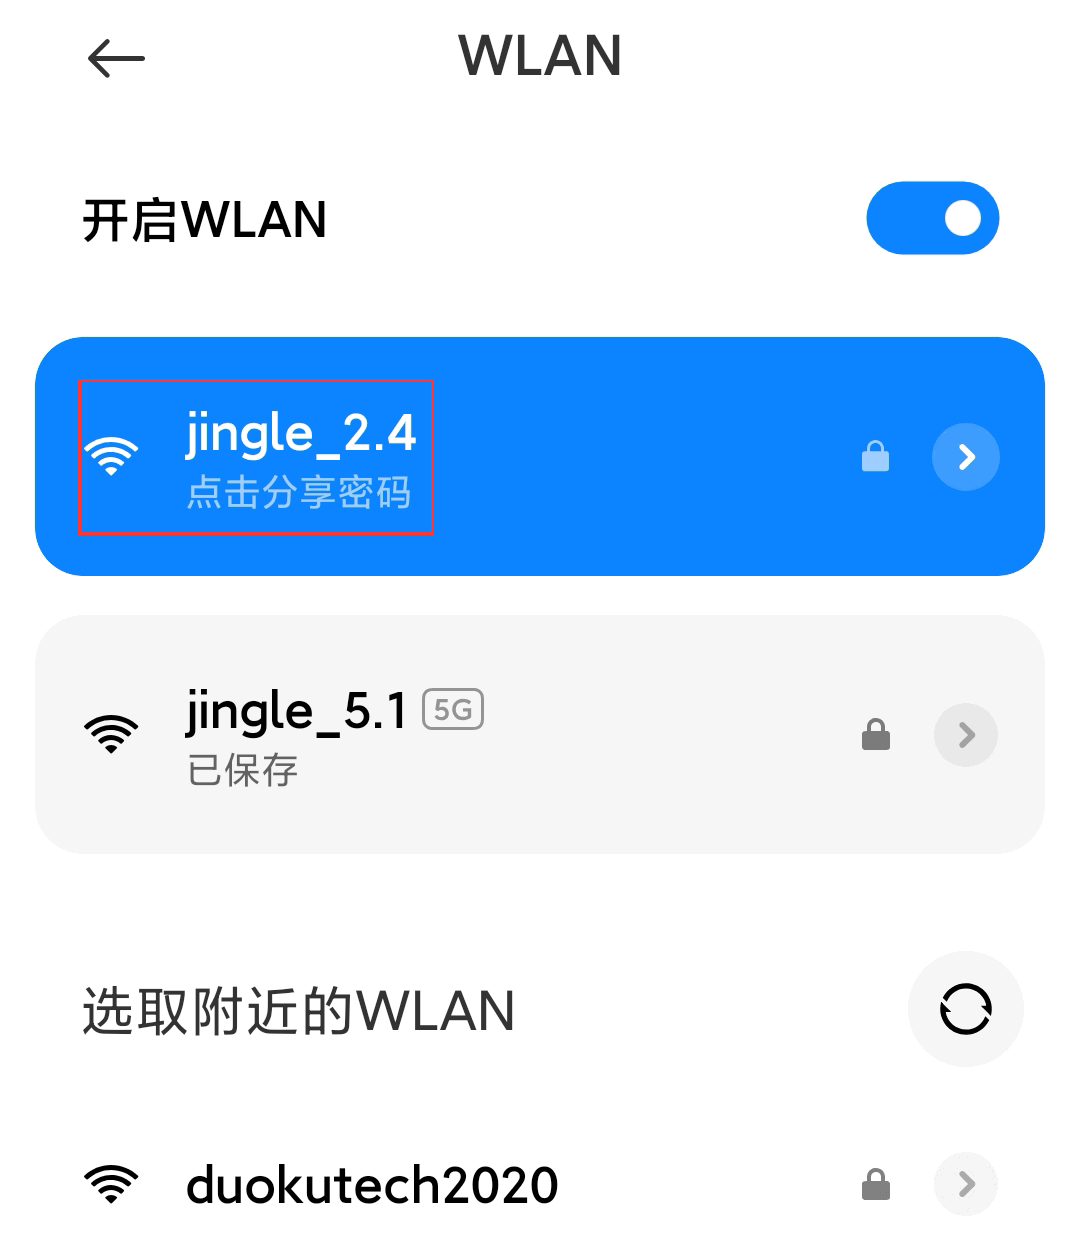 Android手机的WiFi添加完成